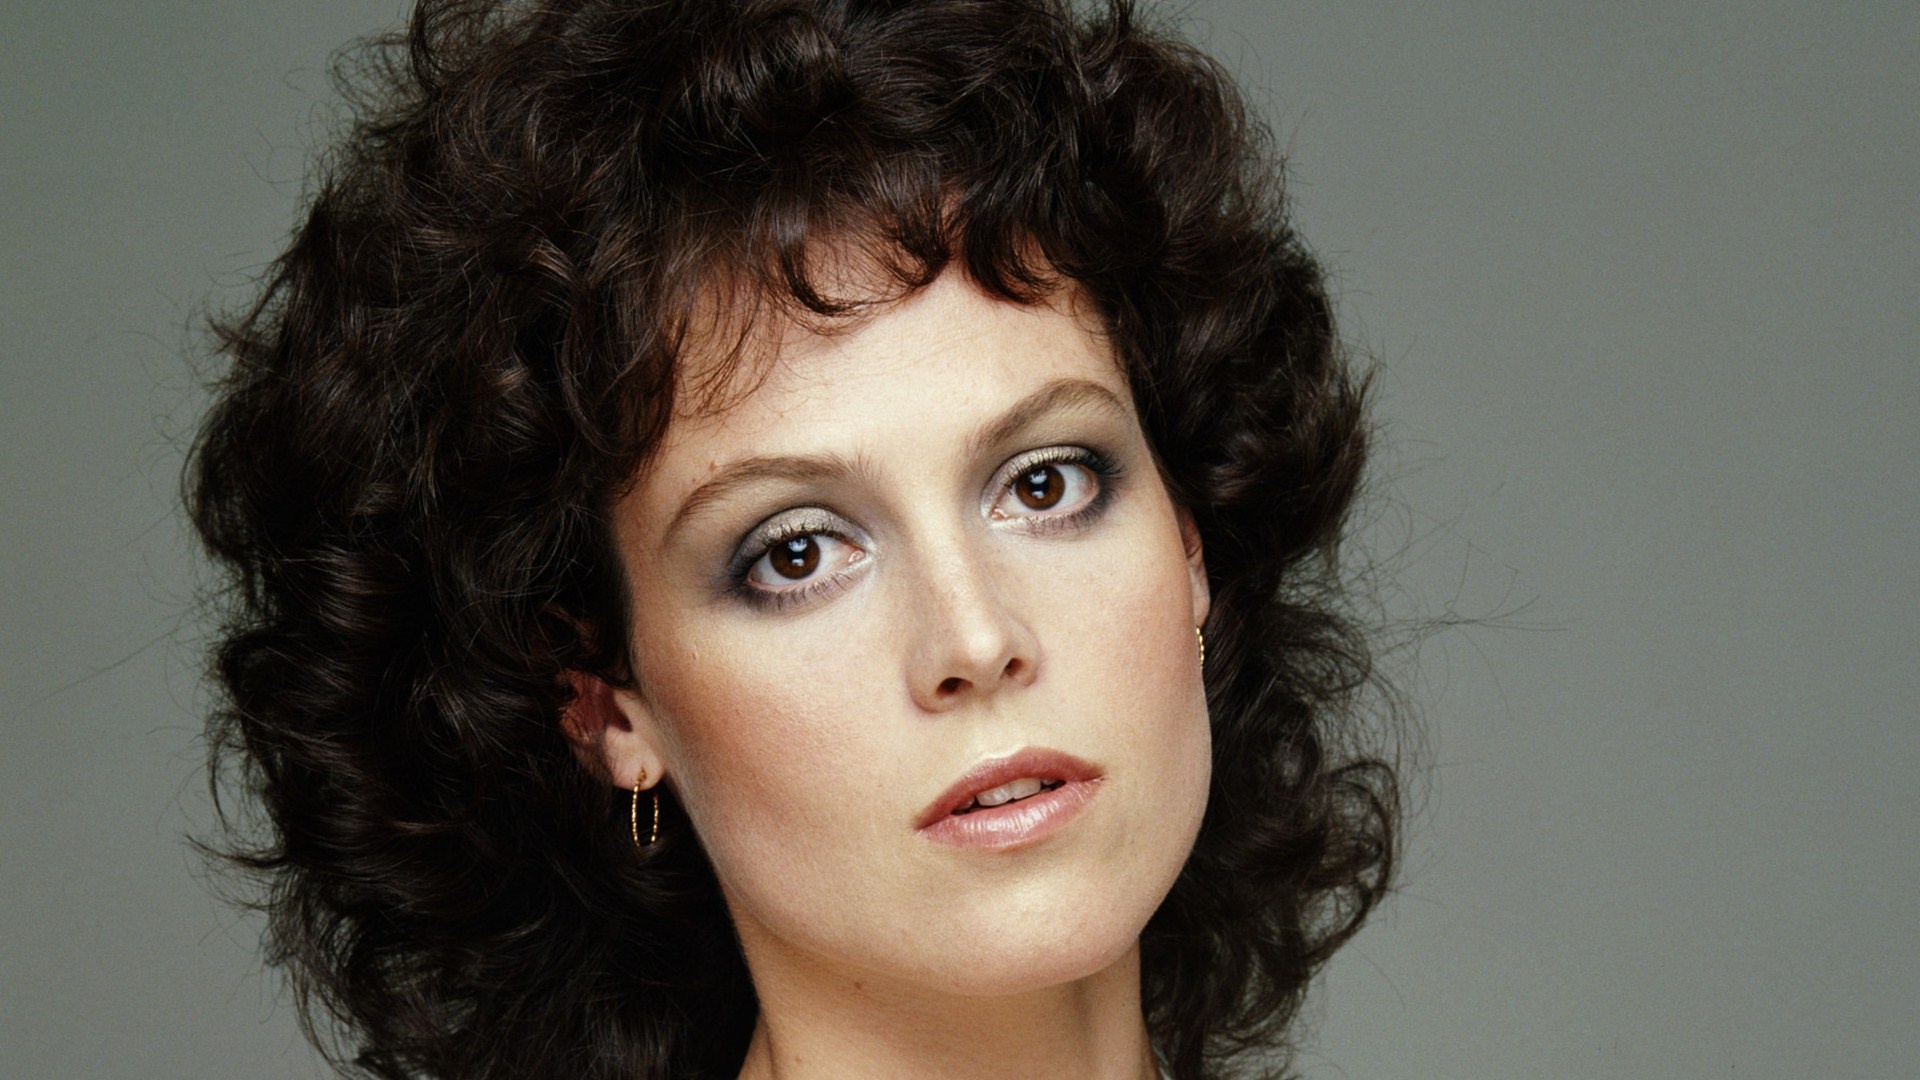 Sigourney Weaver: An American actress, considered to be a pioneer of action heroines in science fiction. 1920x1080 Full HD Wallpaper.